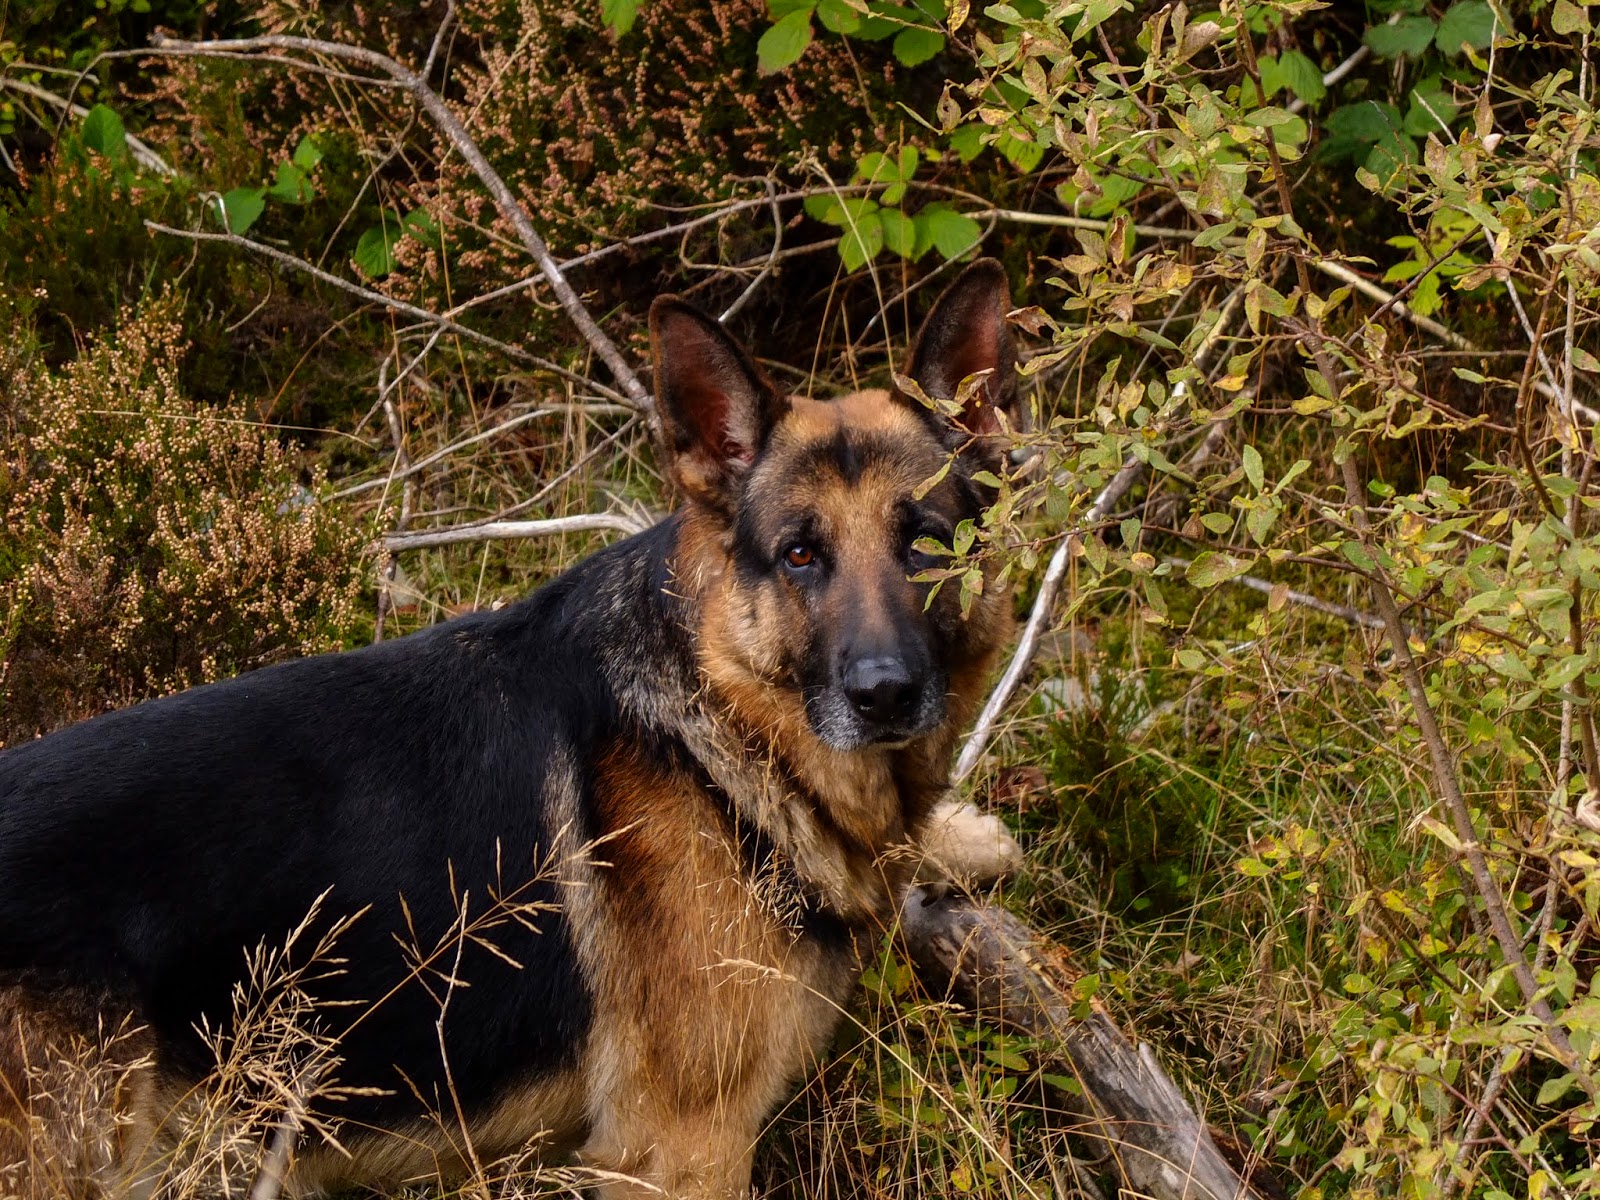 A German Shepherd Steve standing among branches and grasses looking at the camera.